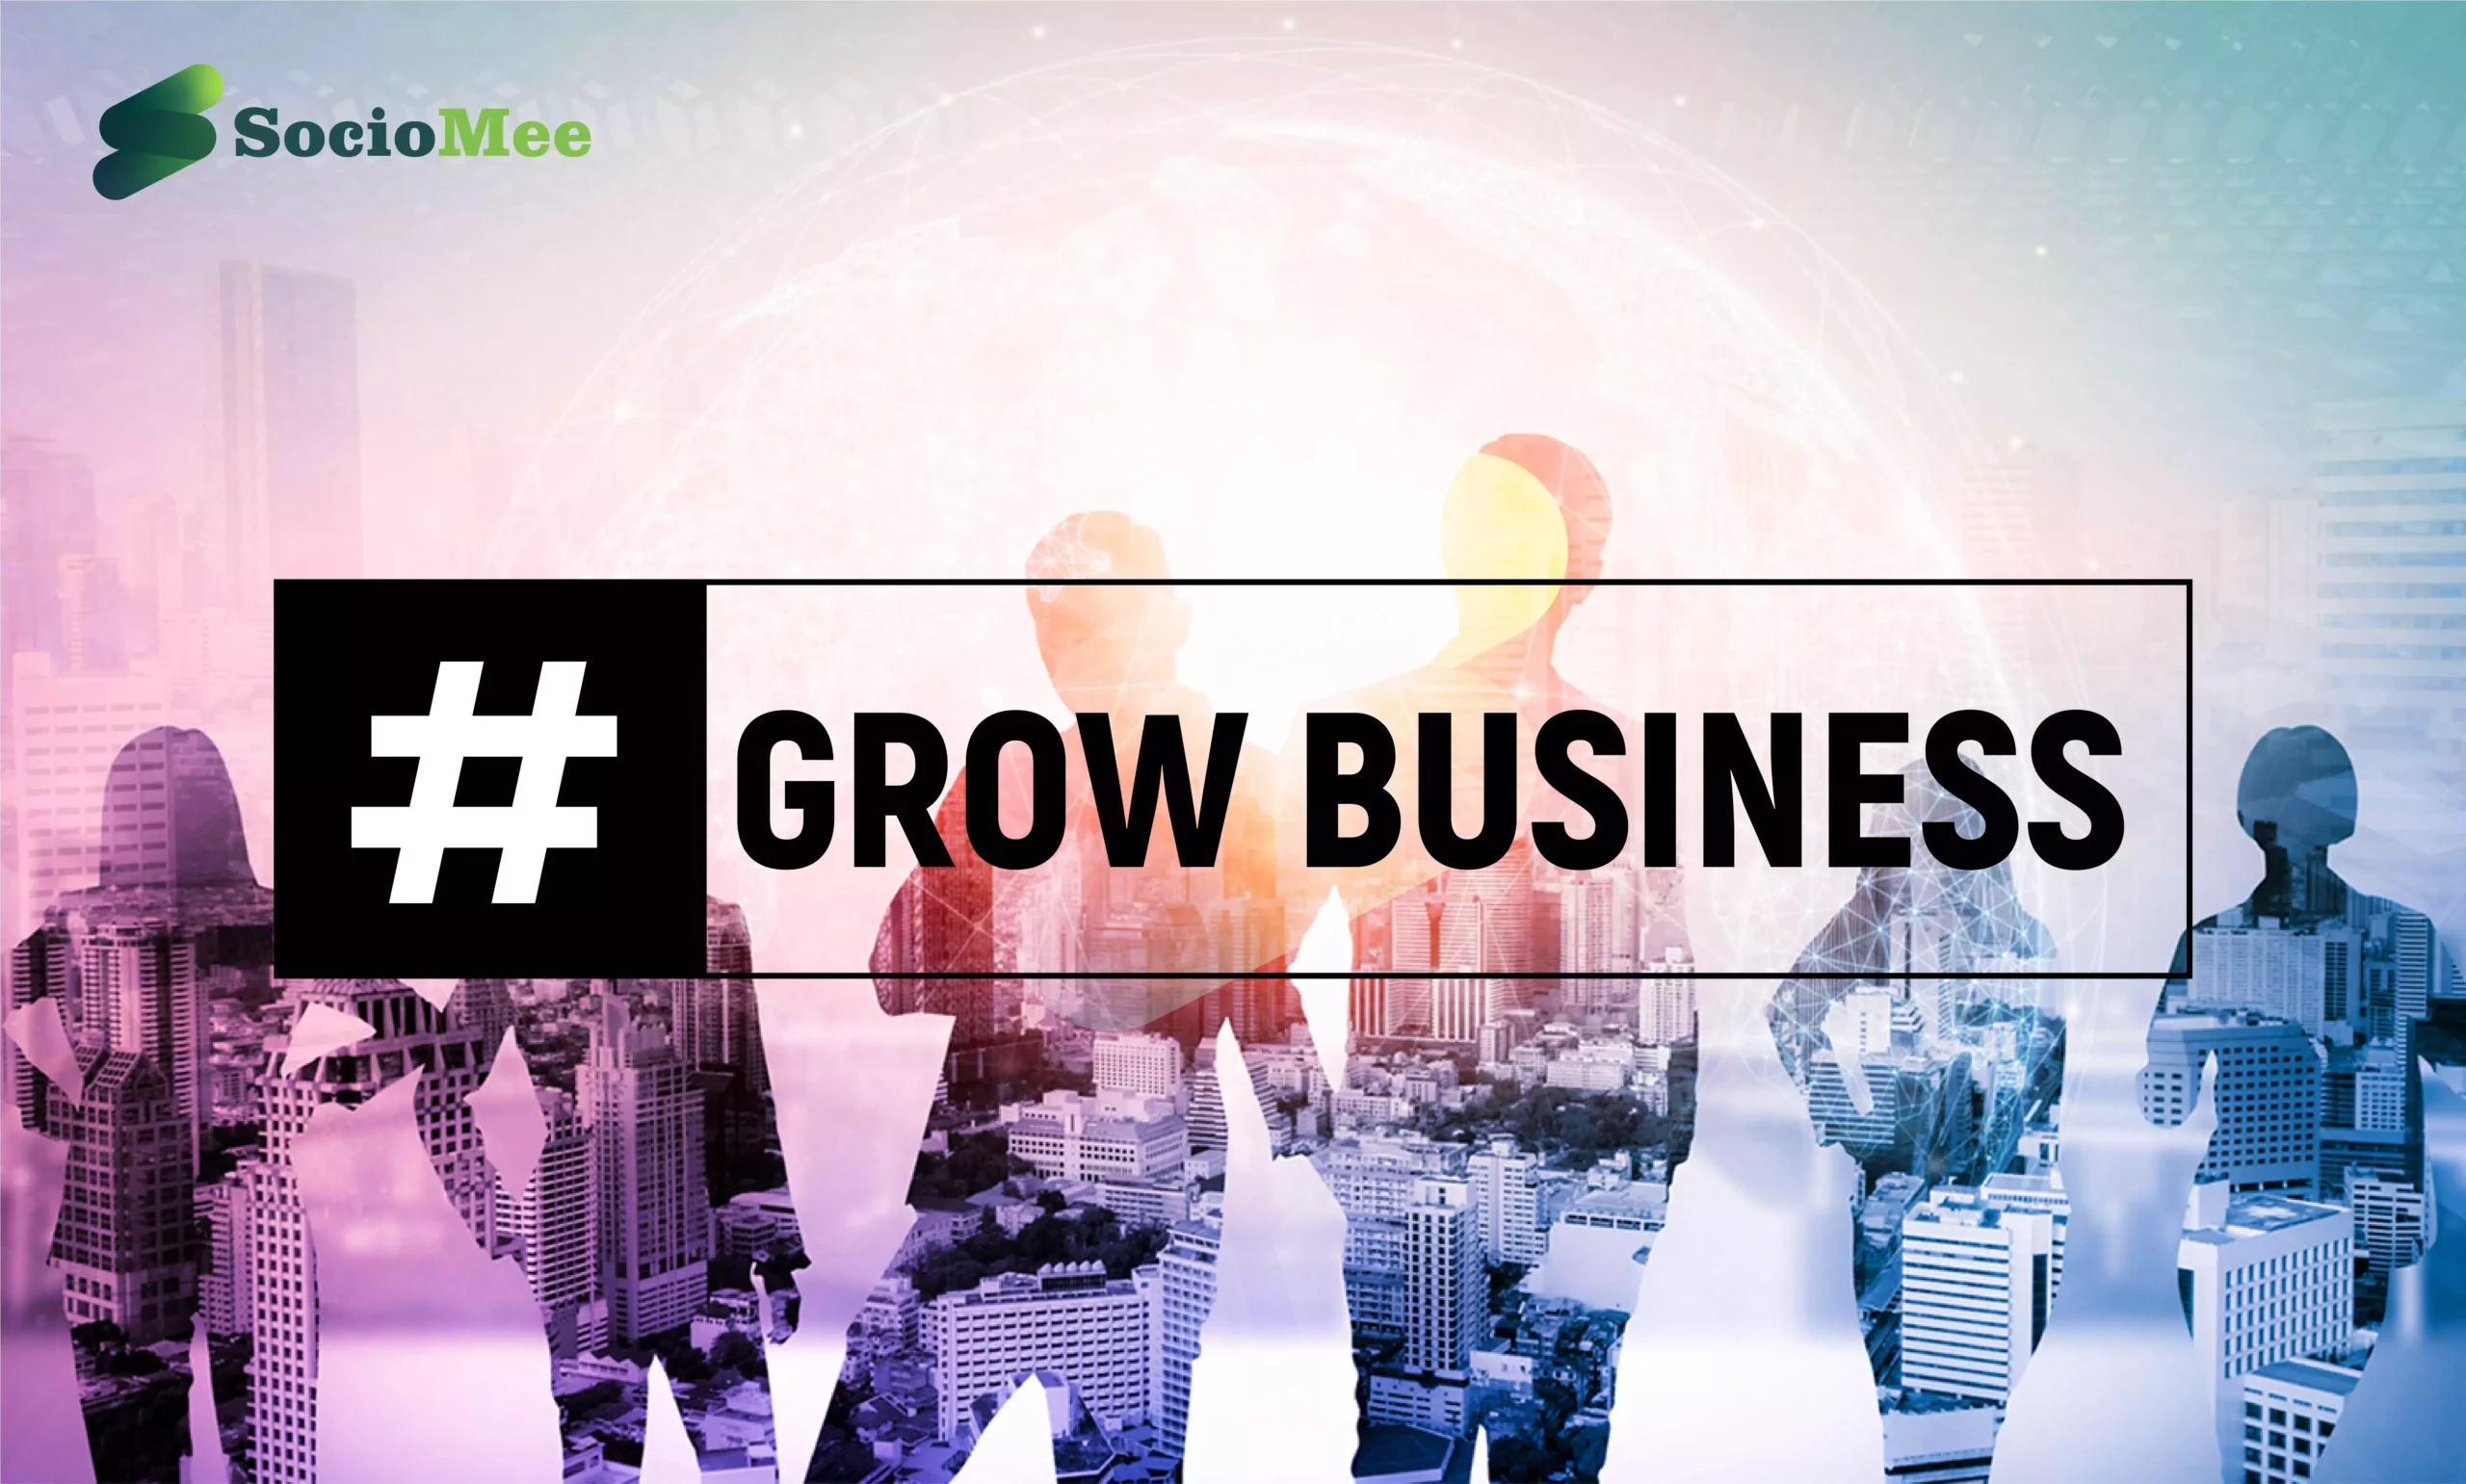 The Ultimate Secret Behind SocioMee Hashtags That Will Grow your business